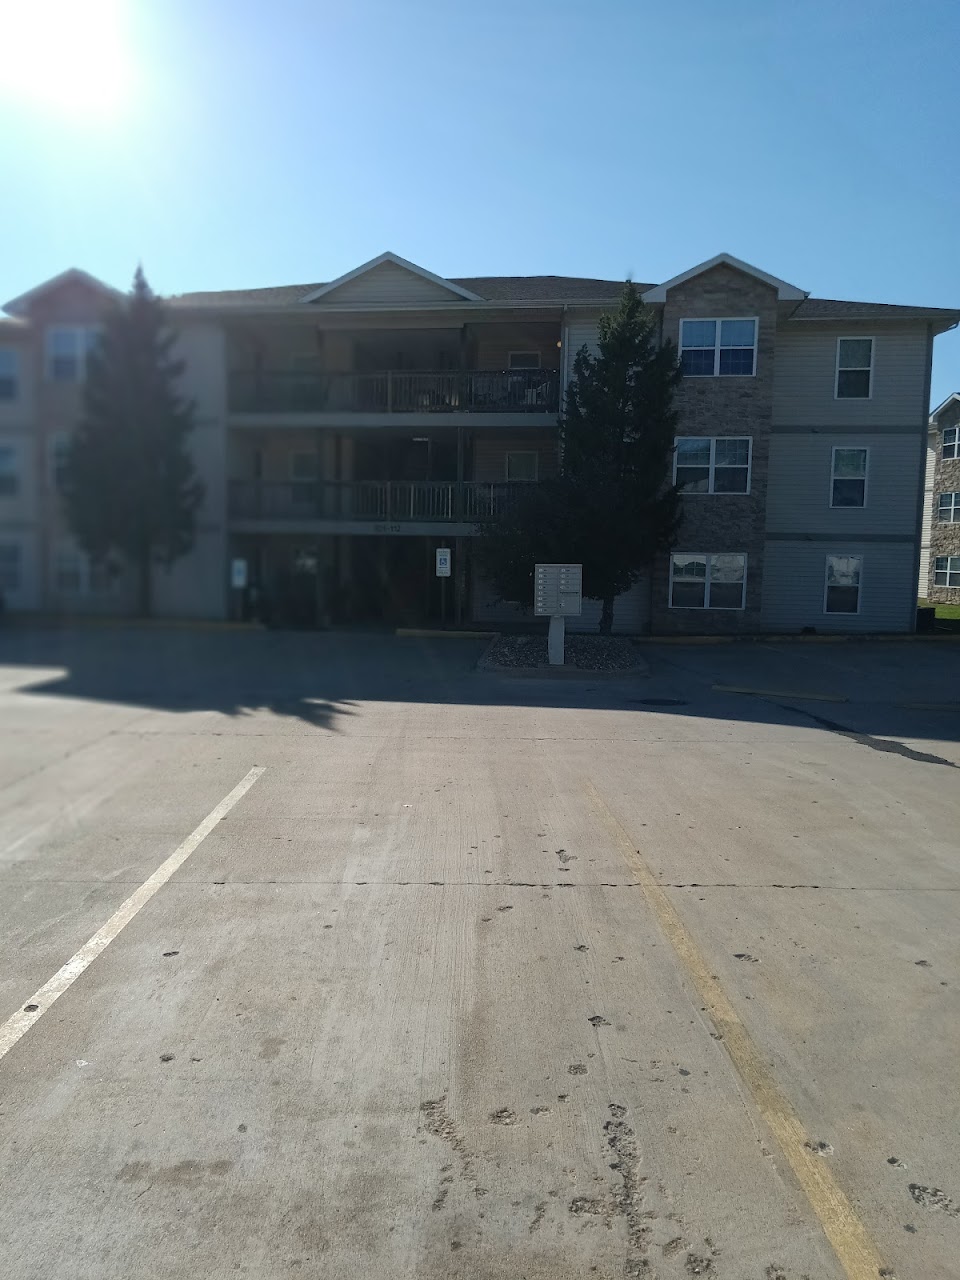 Photo of CEDAR CREEK CROSSING. Affordable housing located at 2320 N 12TH ST QUINCY, IL 62305